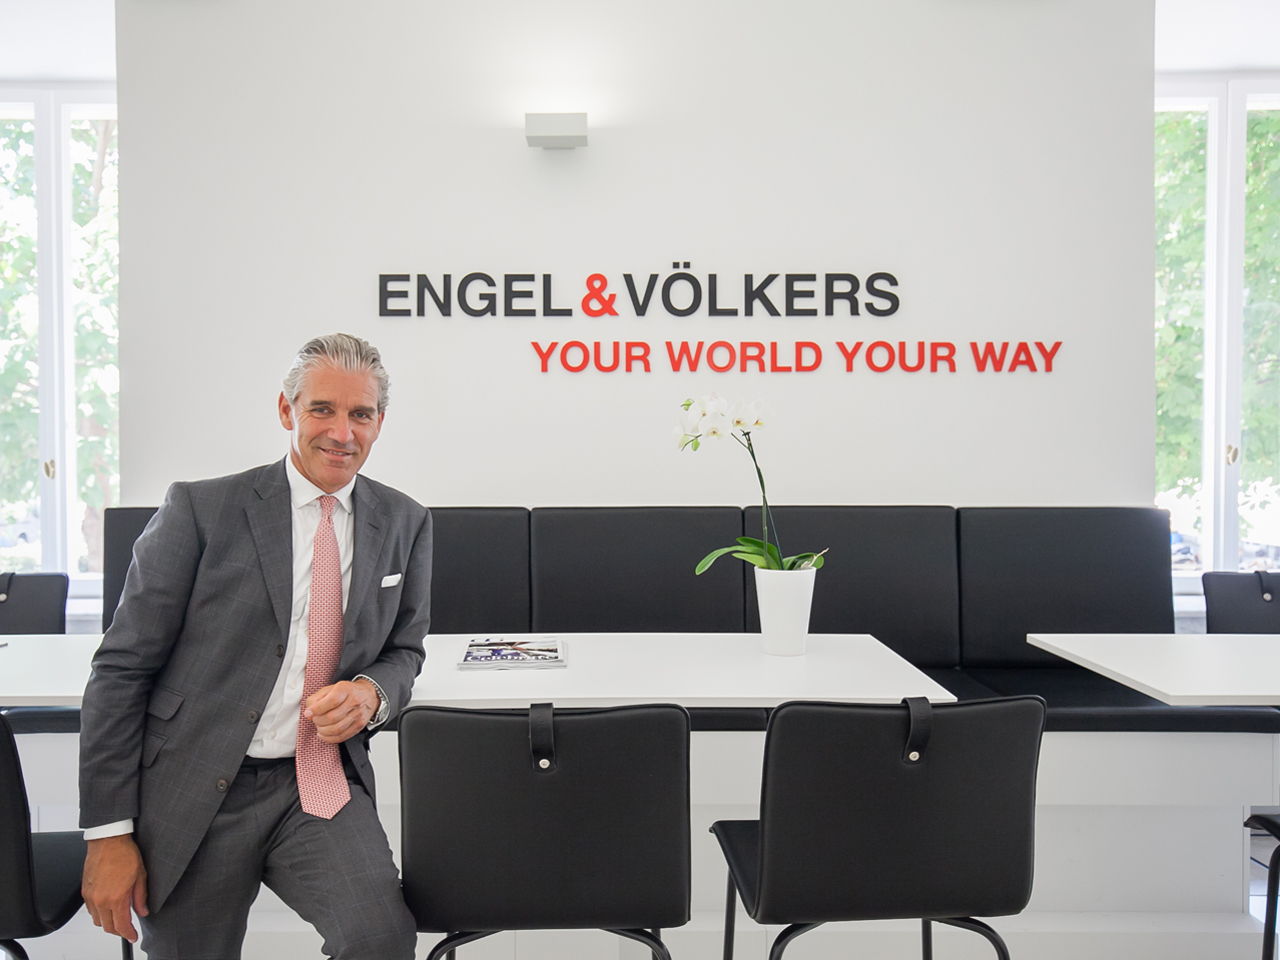 40 years of Engel & Völkers - the road to becoming a global brand